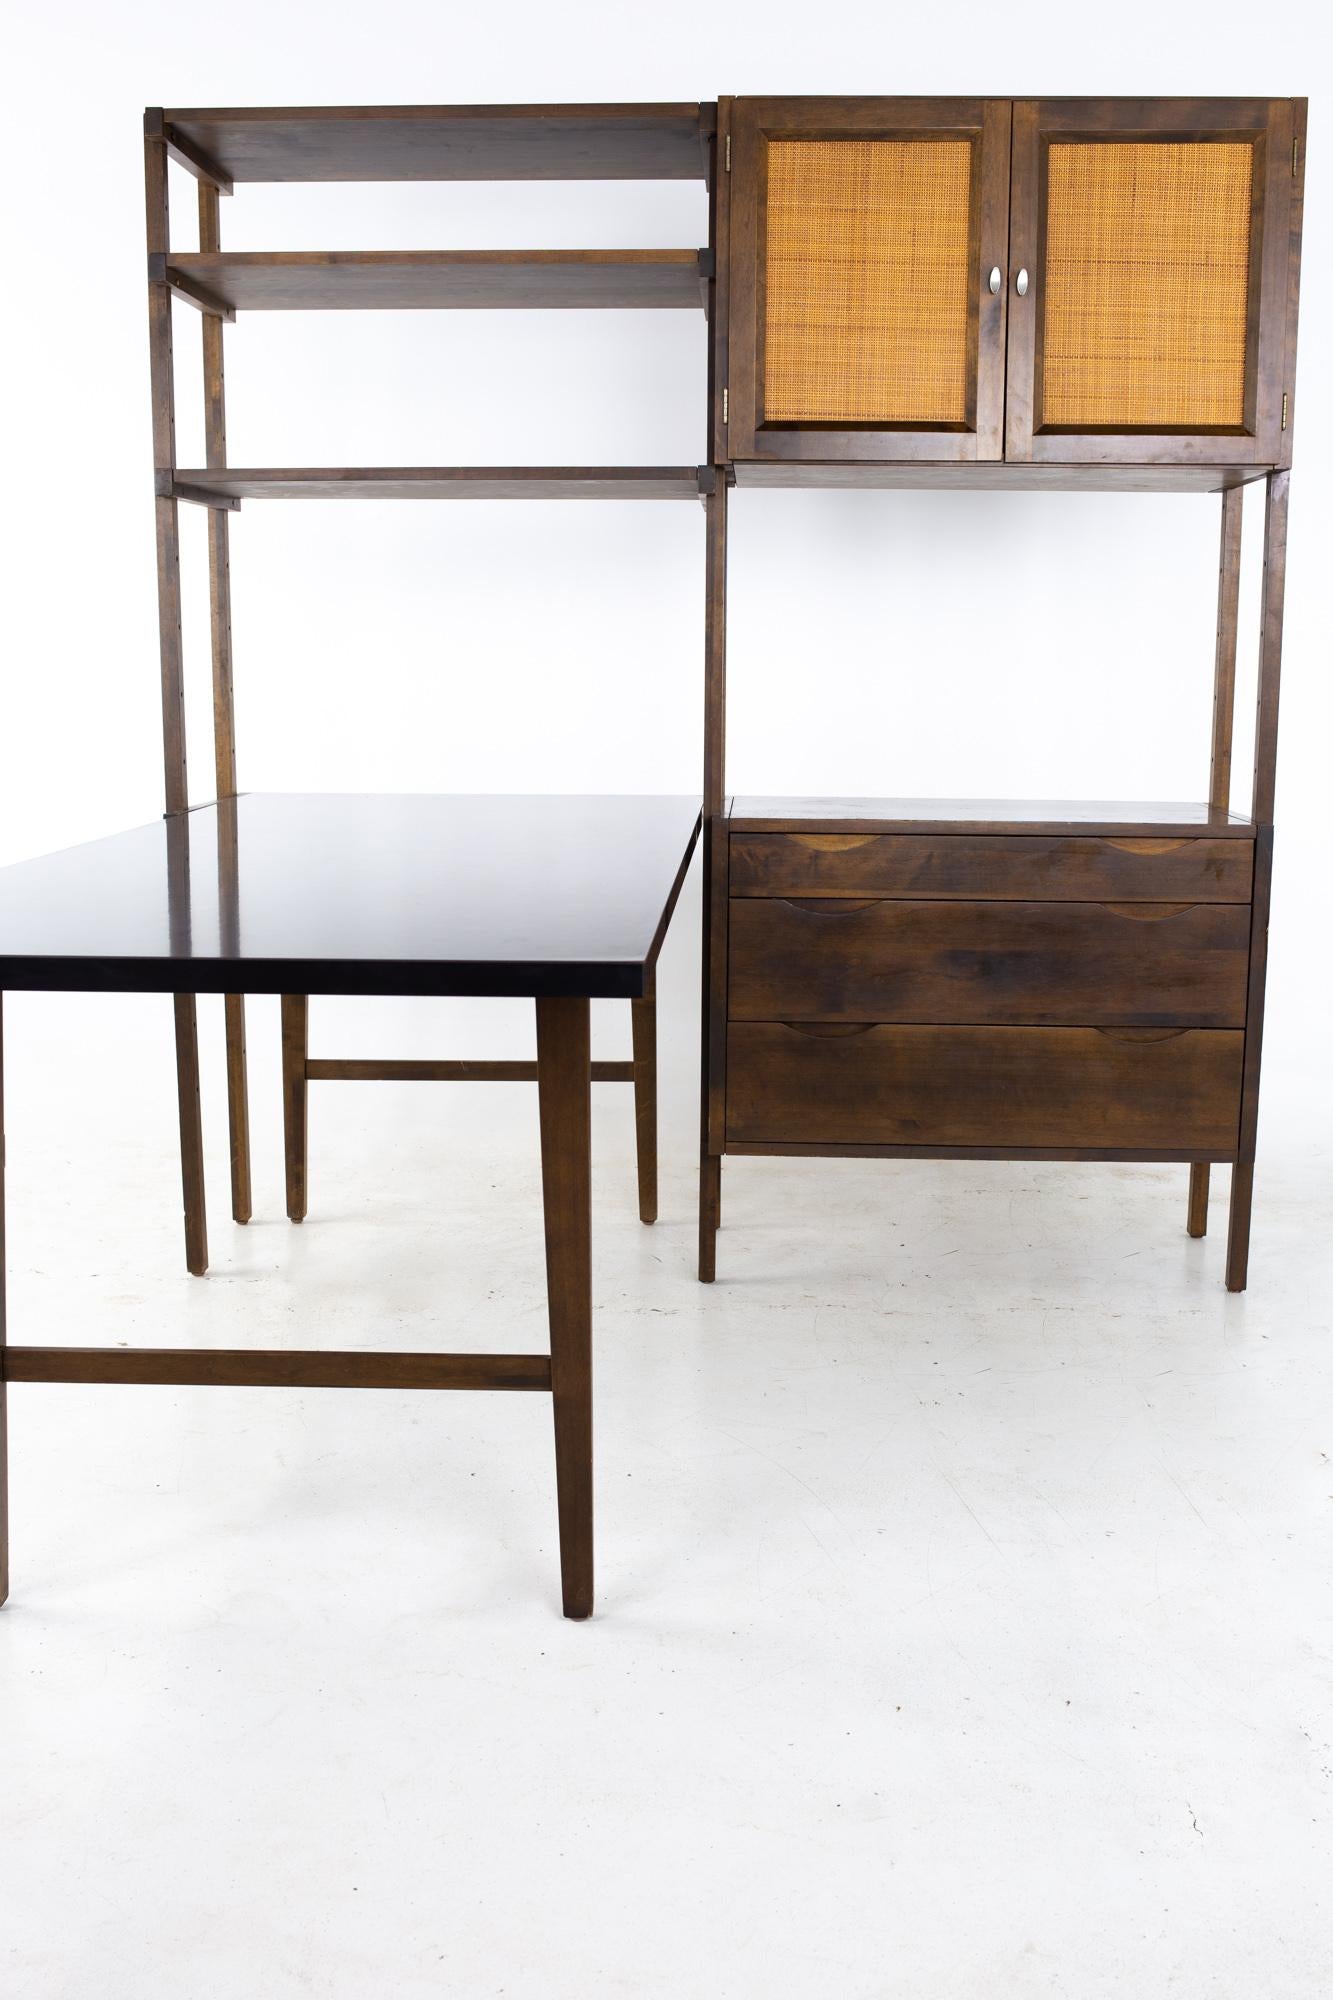 Noral Olson Kopenhavn mid century Danish freestanding desk wall unit
Wall unite measures: 84.5 wide x 72 deep x 69 inches high, with a chair clearance of 27.5 inches 

All pieces of furniture can be had in what we call restored vintage condition.